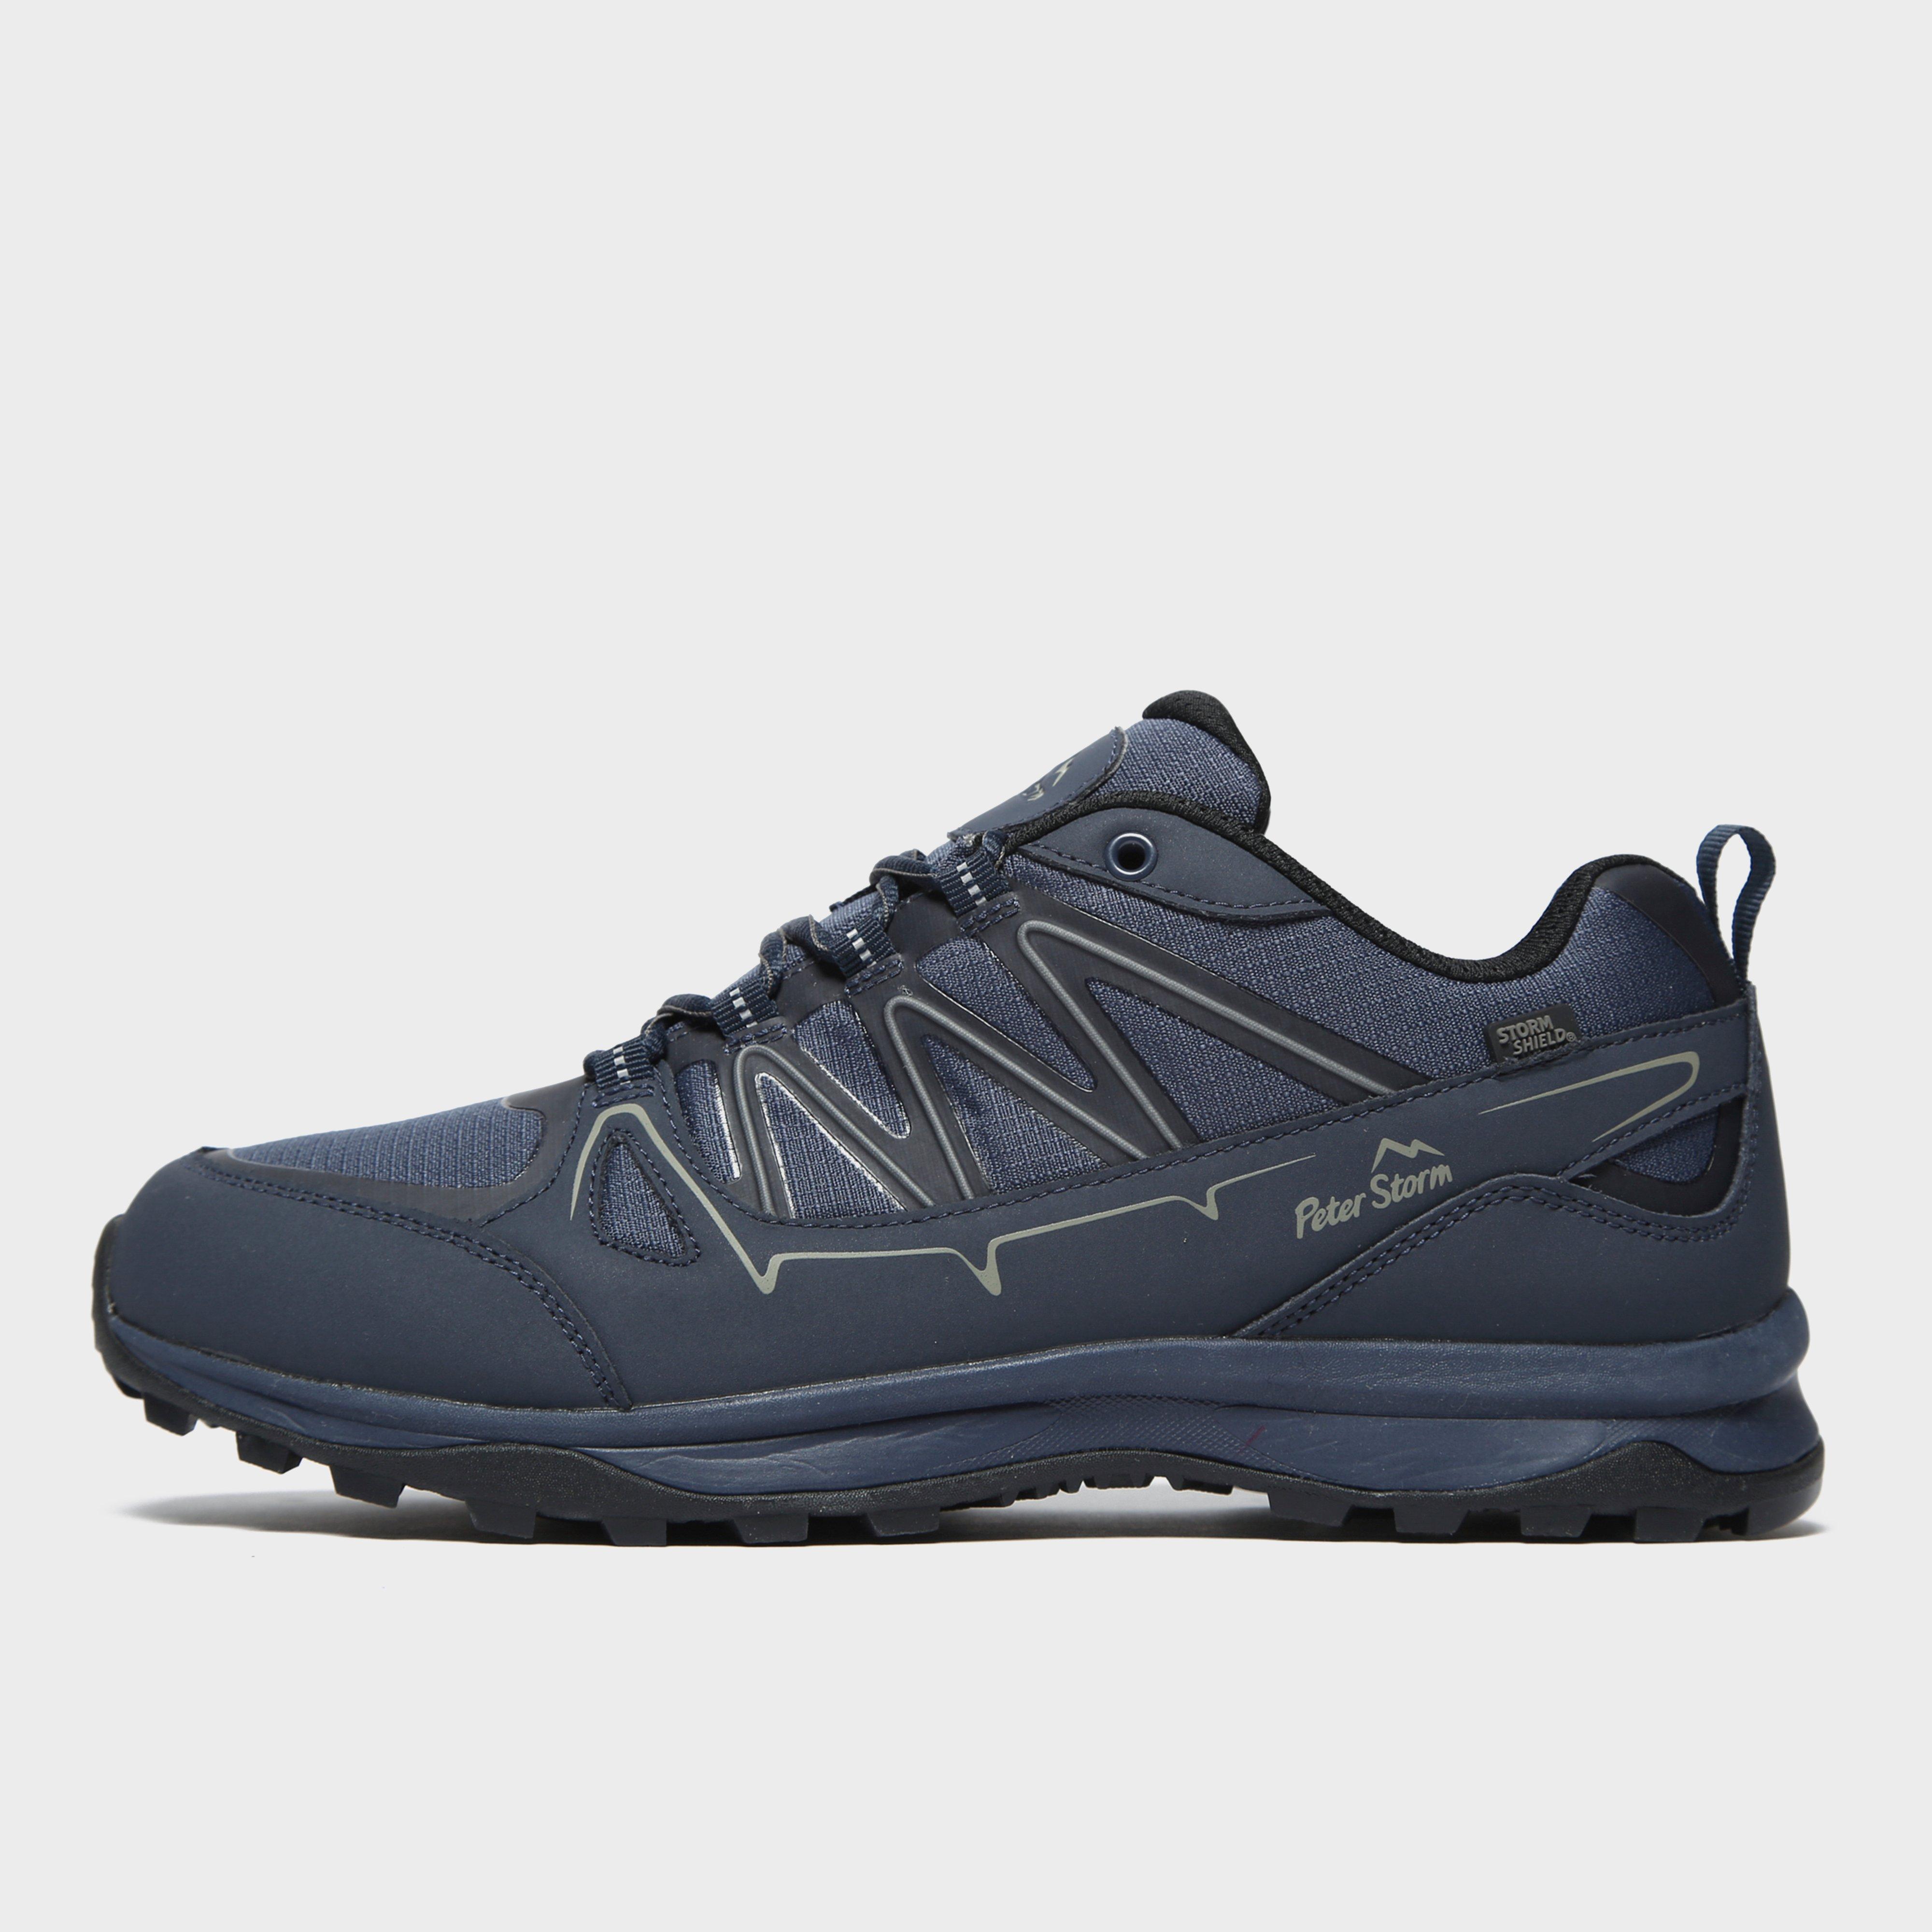 Peter Storm Mens Motion Lite Walking Shoes - Navy/nvy  Navy/nvy